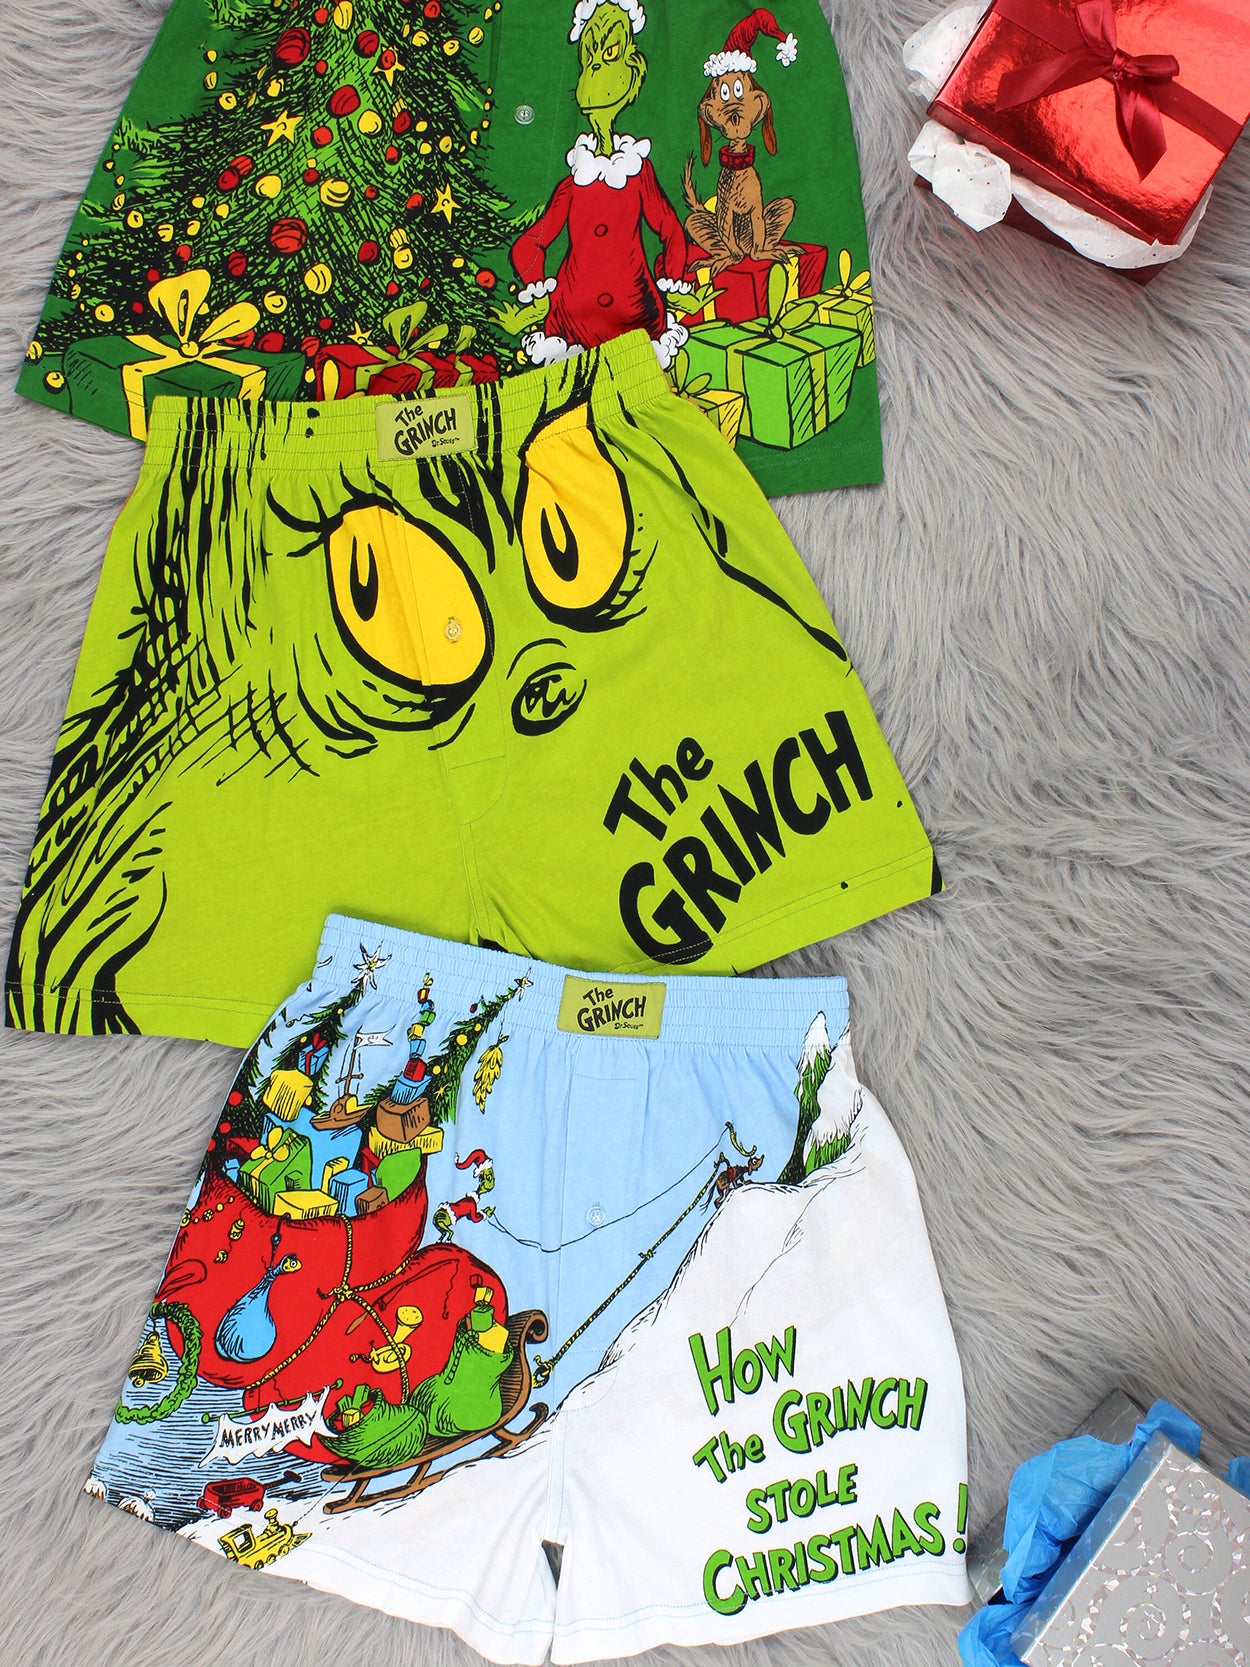 Grinch Lunch Box Dr.Seuss - How the Grinch stole Christmas Mini